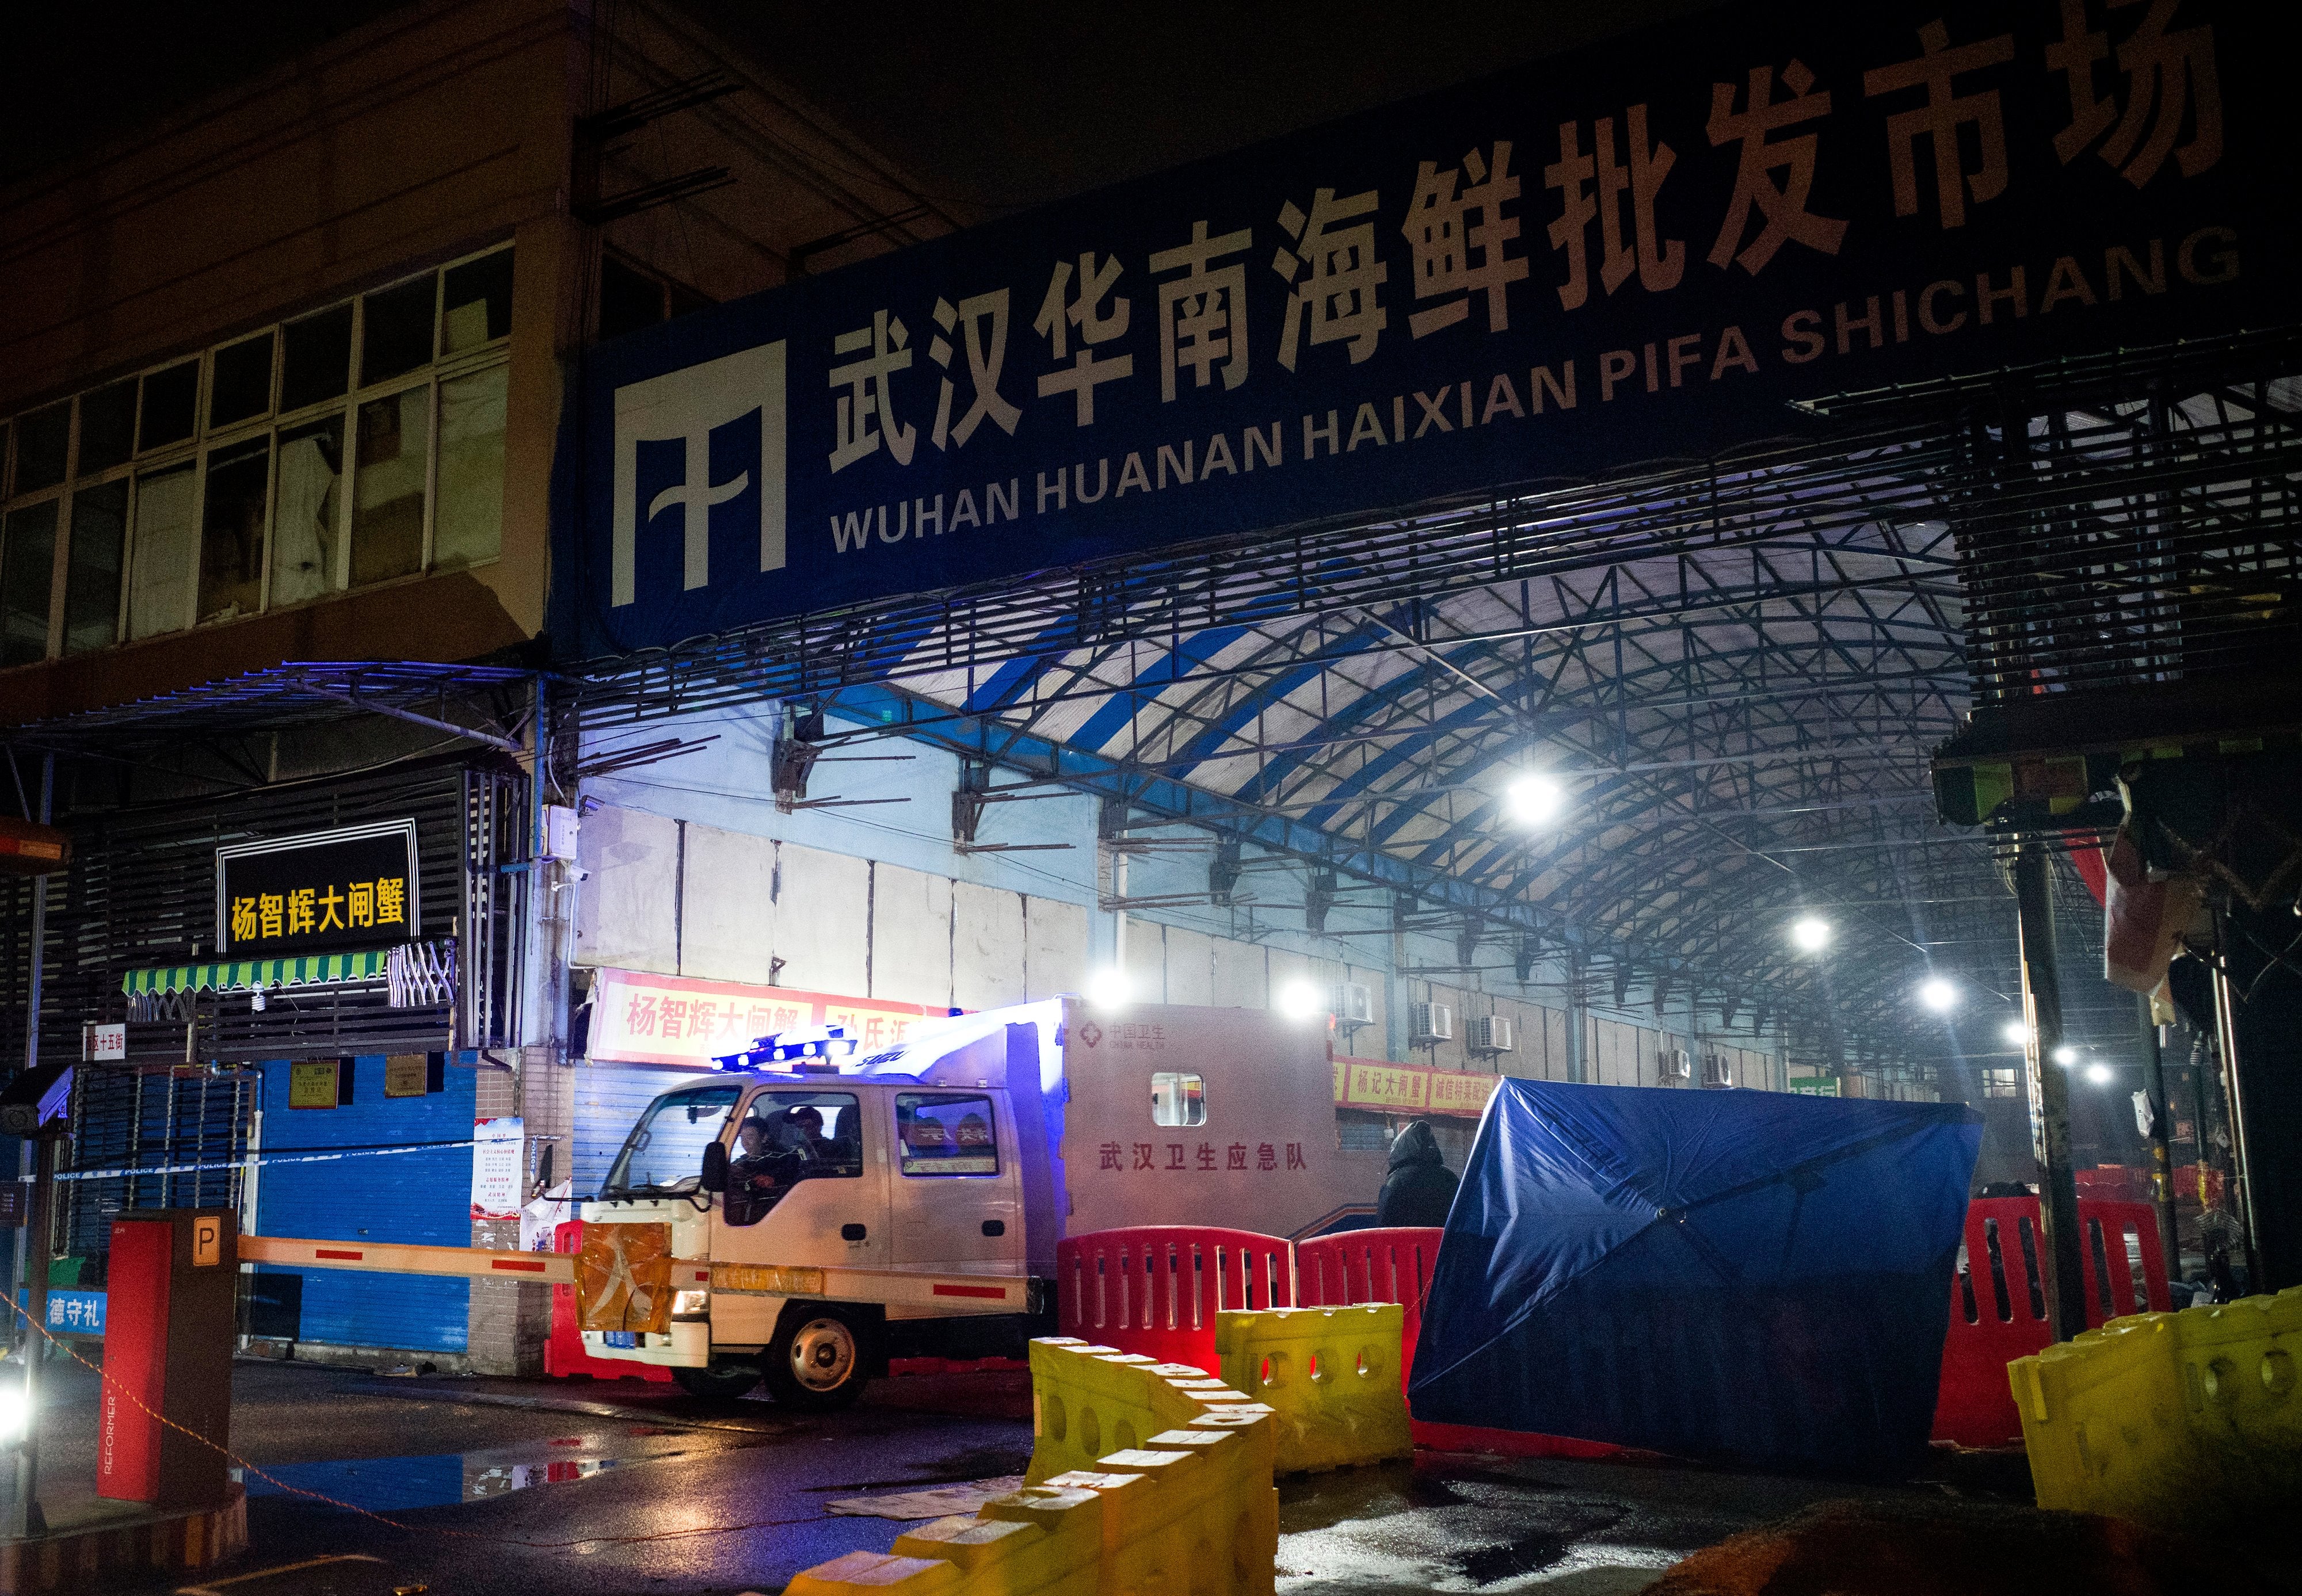 The Huanan seafood wholesale market in Wuhan was closed after a 61-year-old man became the first person to die from what was identified as a respiratory illness&nbsp;